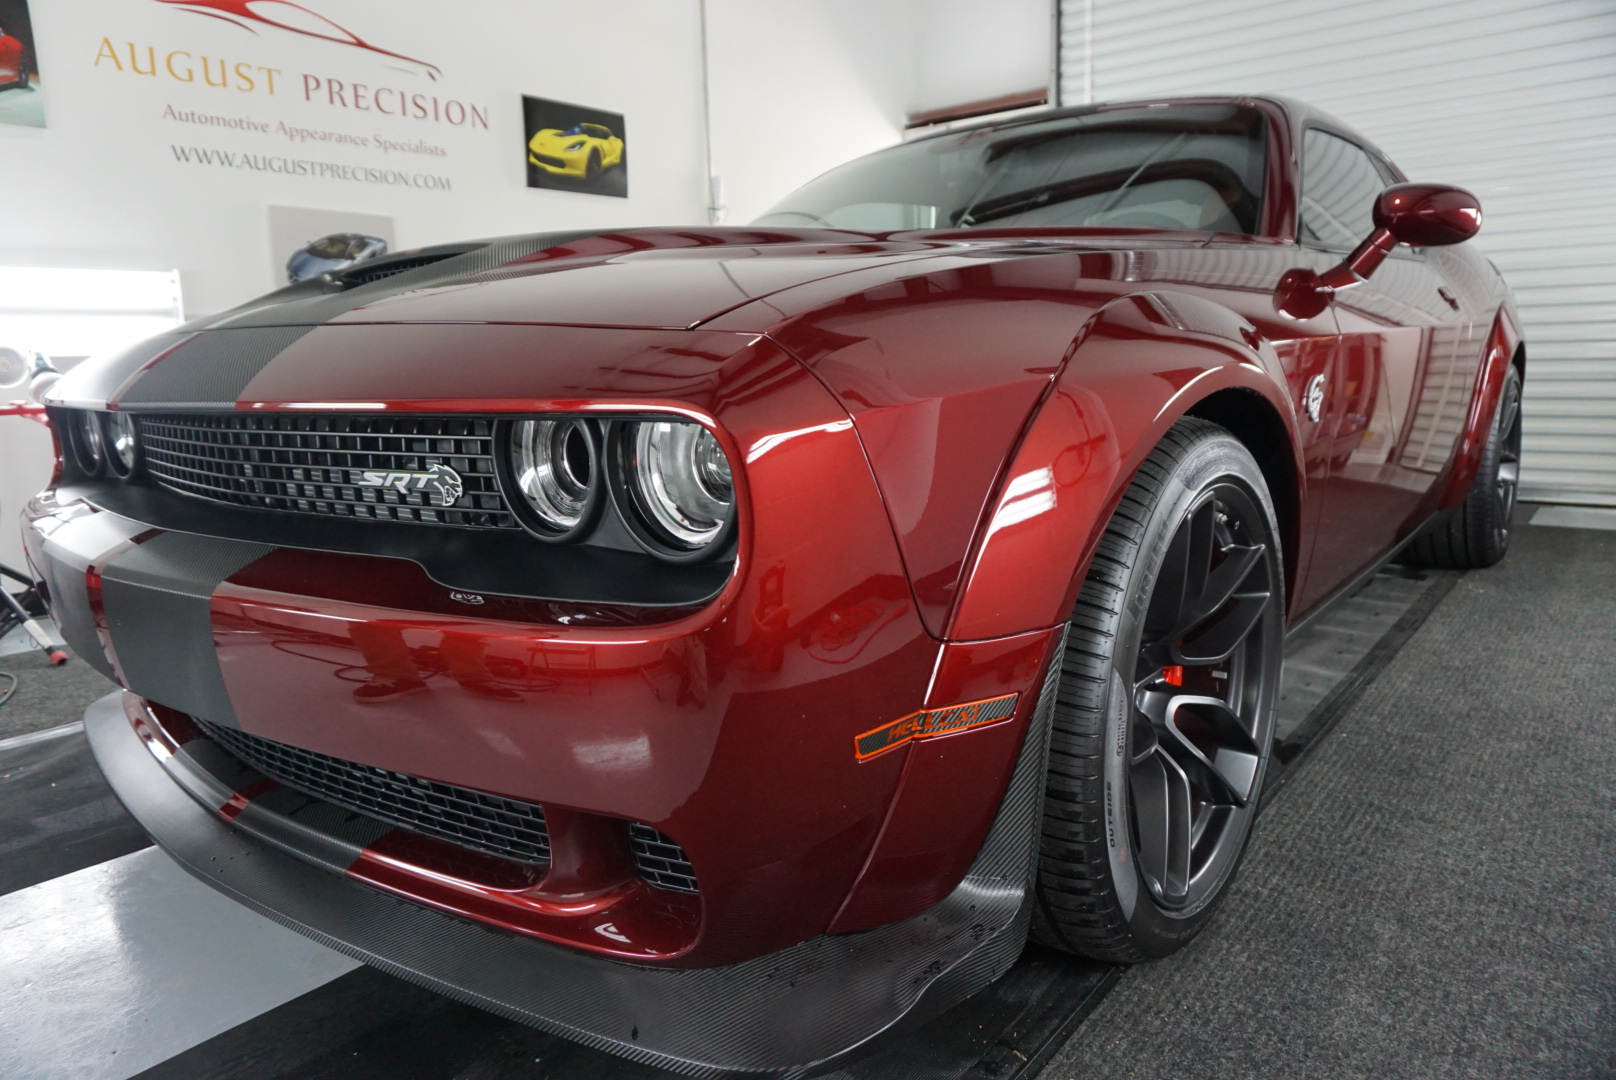 New Car Preparation Package of 2018 Dodge Challenger